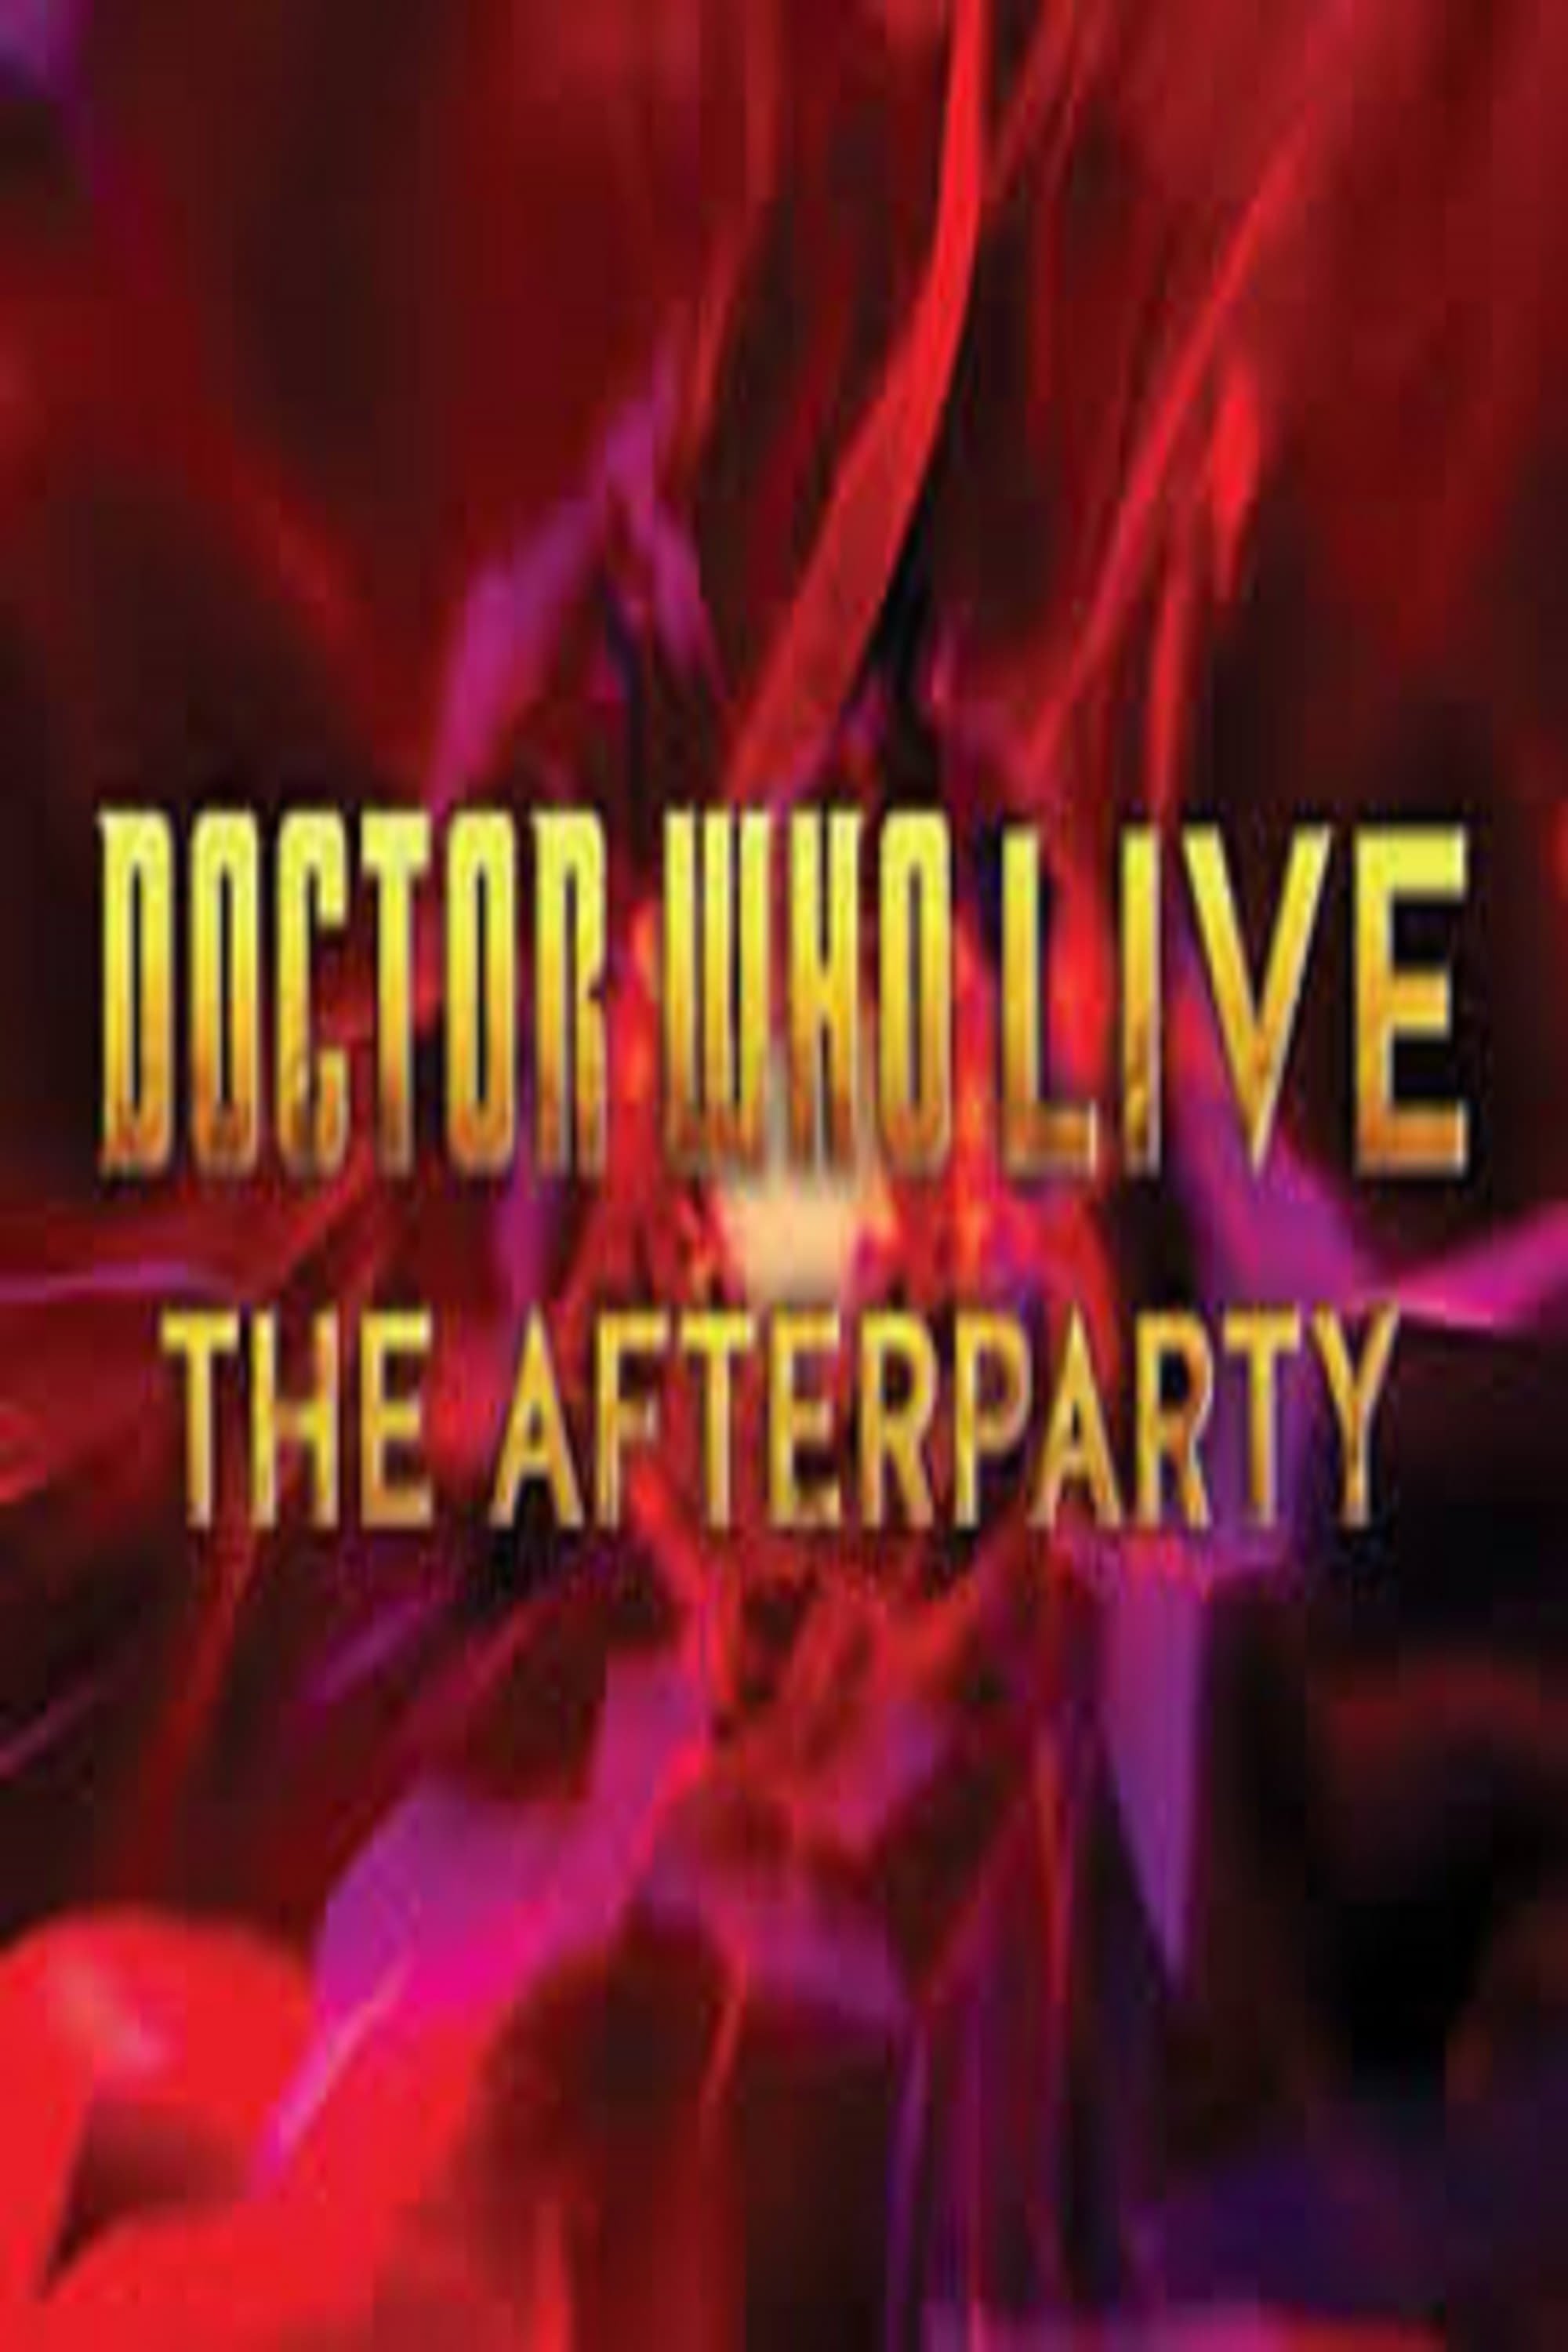 Doctor Who Live: The Afterparty